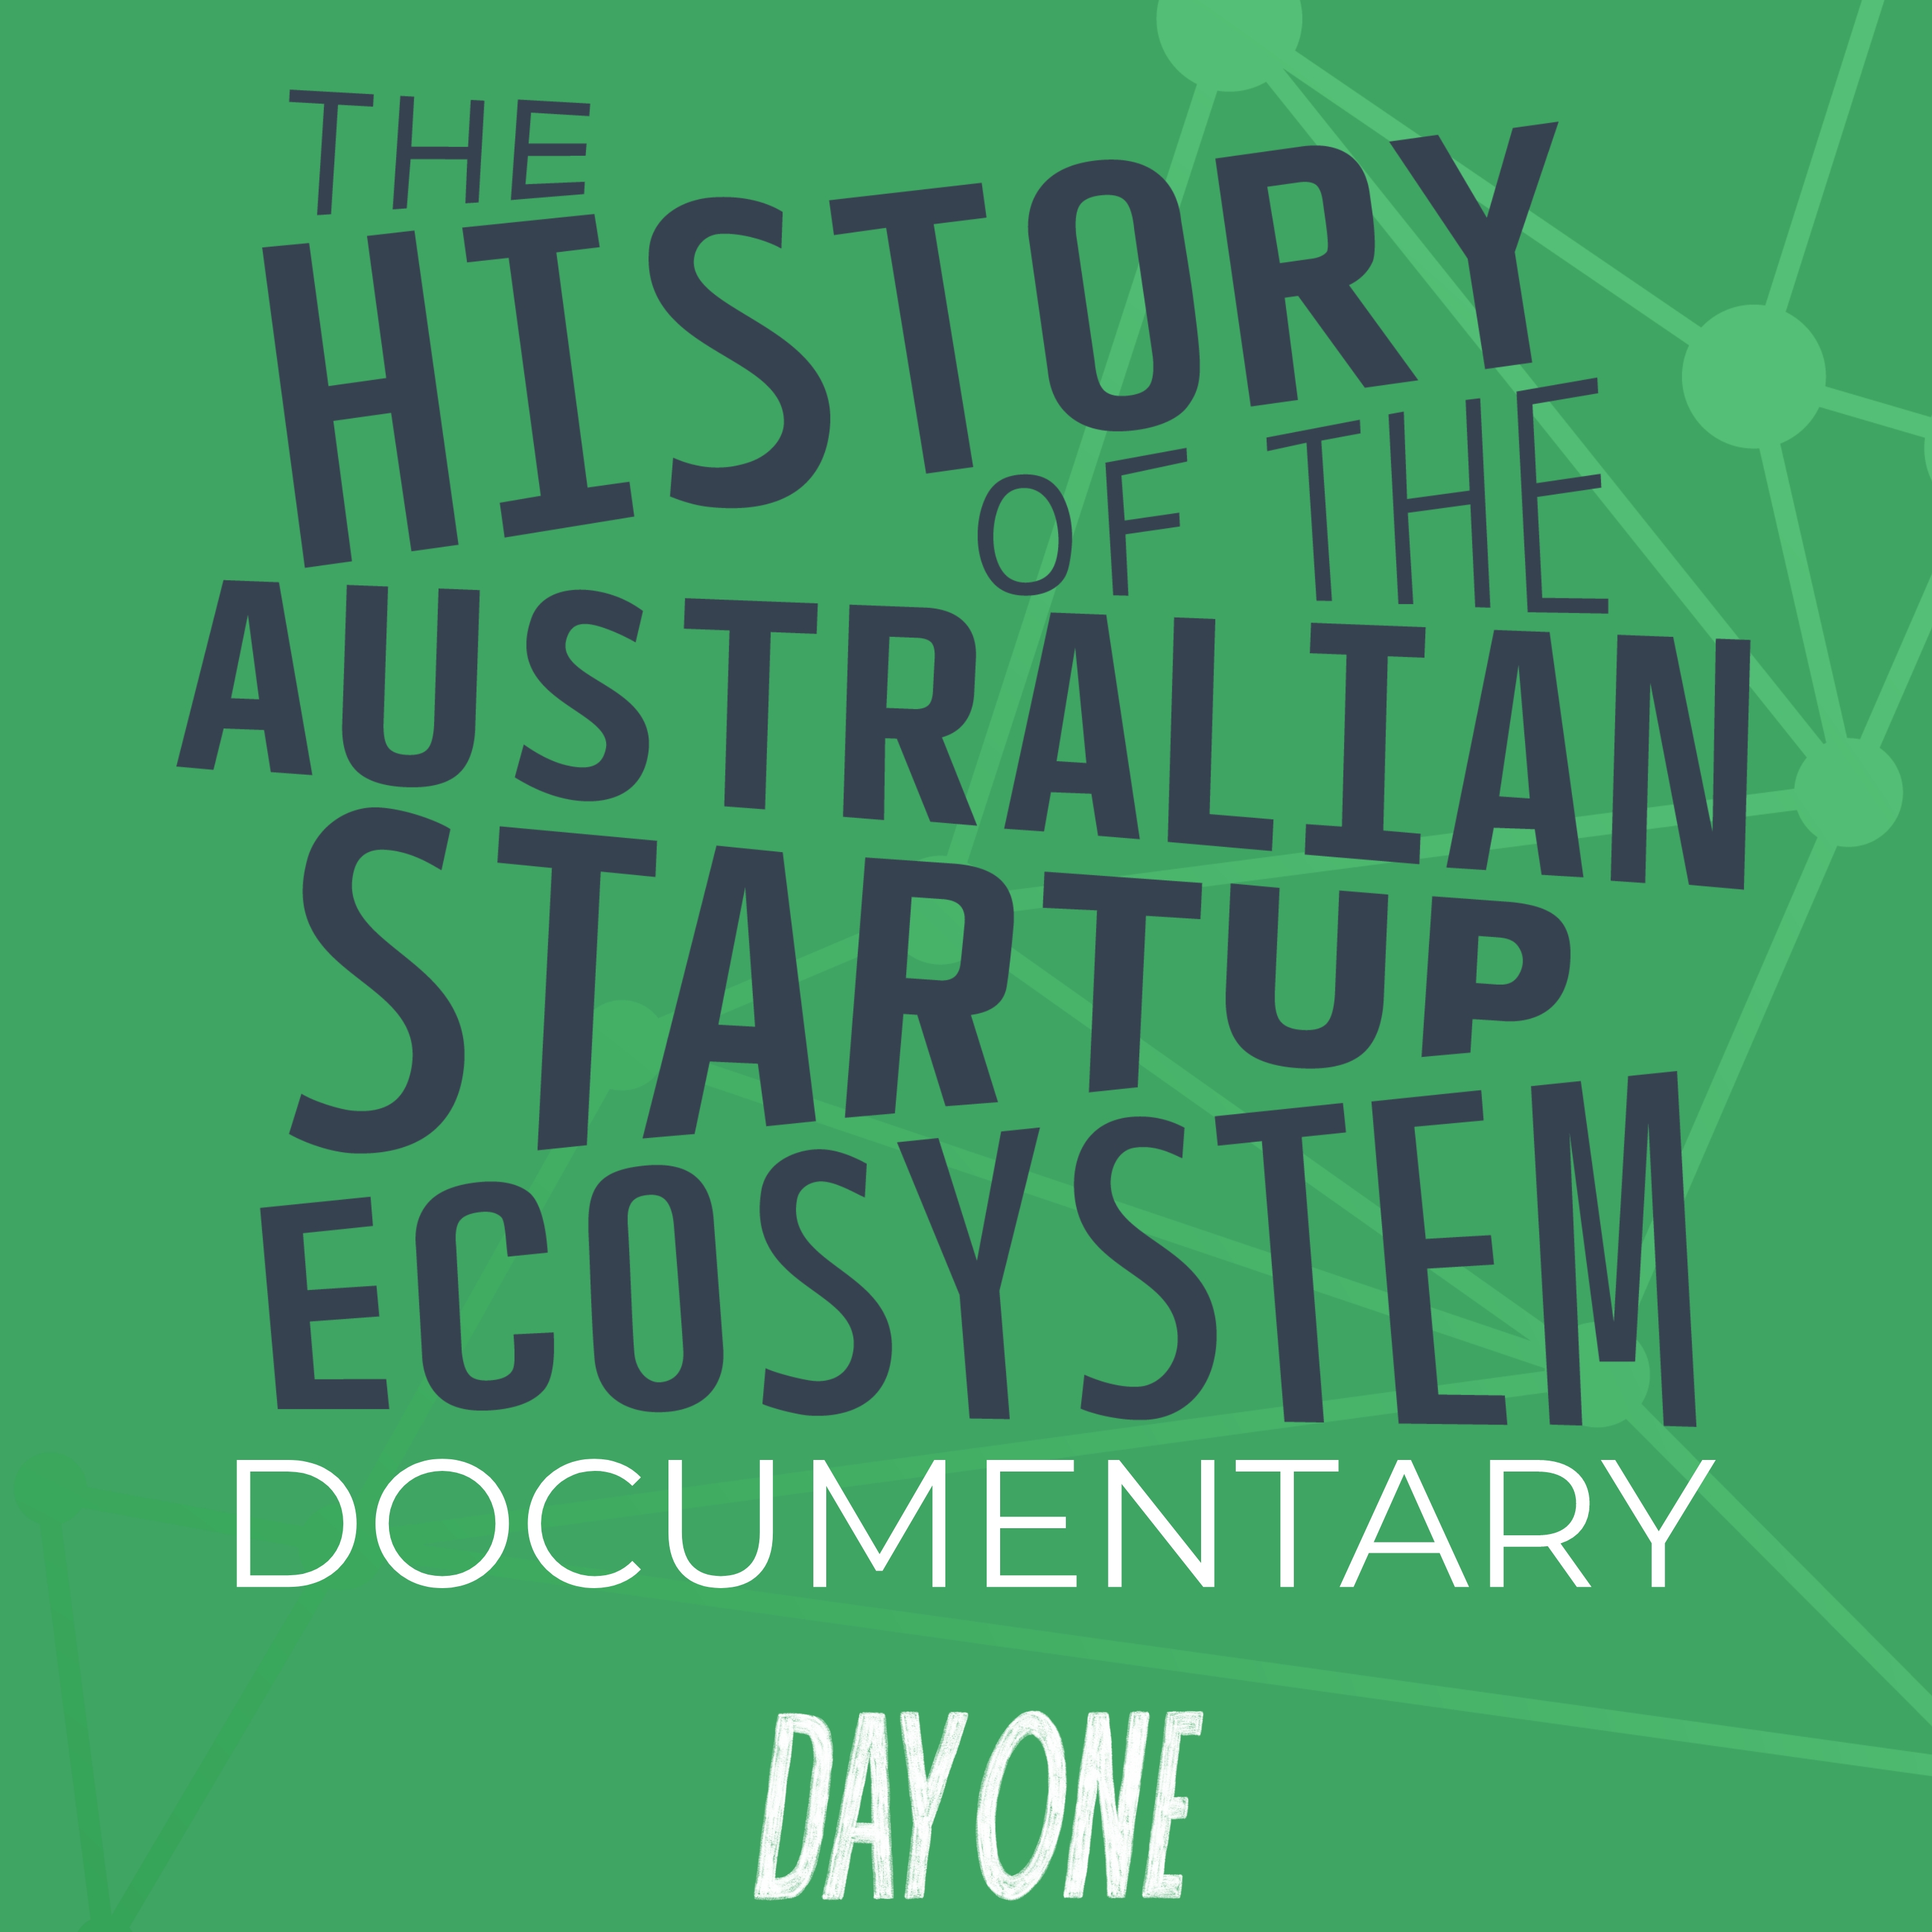 The Documentary: Trailer - The History of the Australian Startup Ecosystem: Documentary